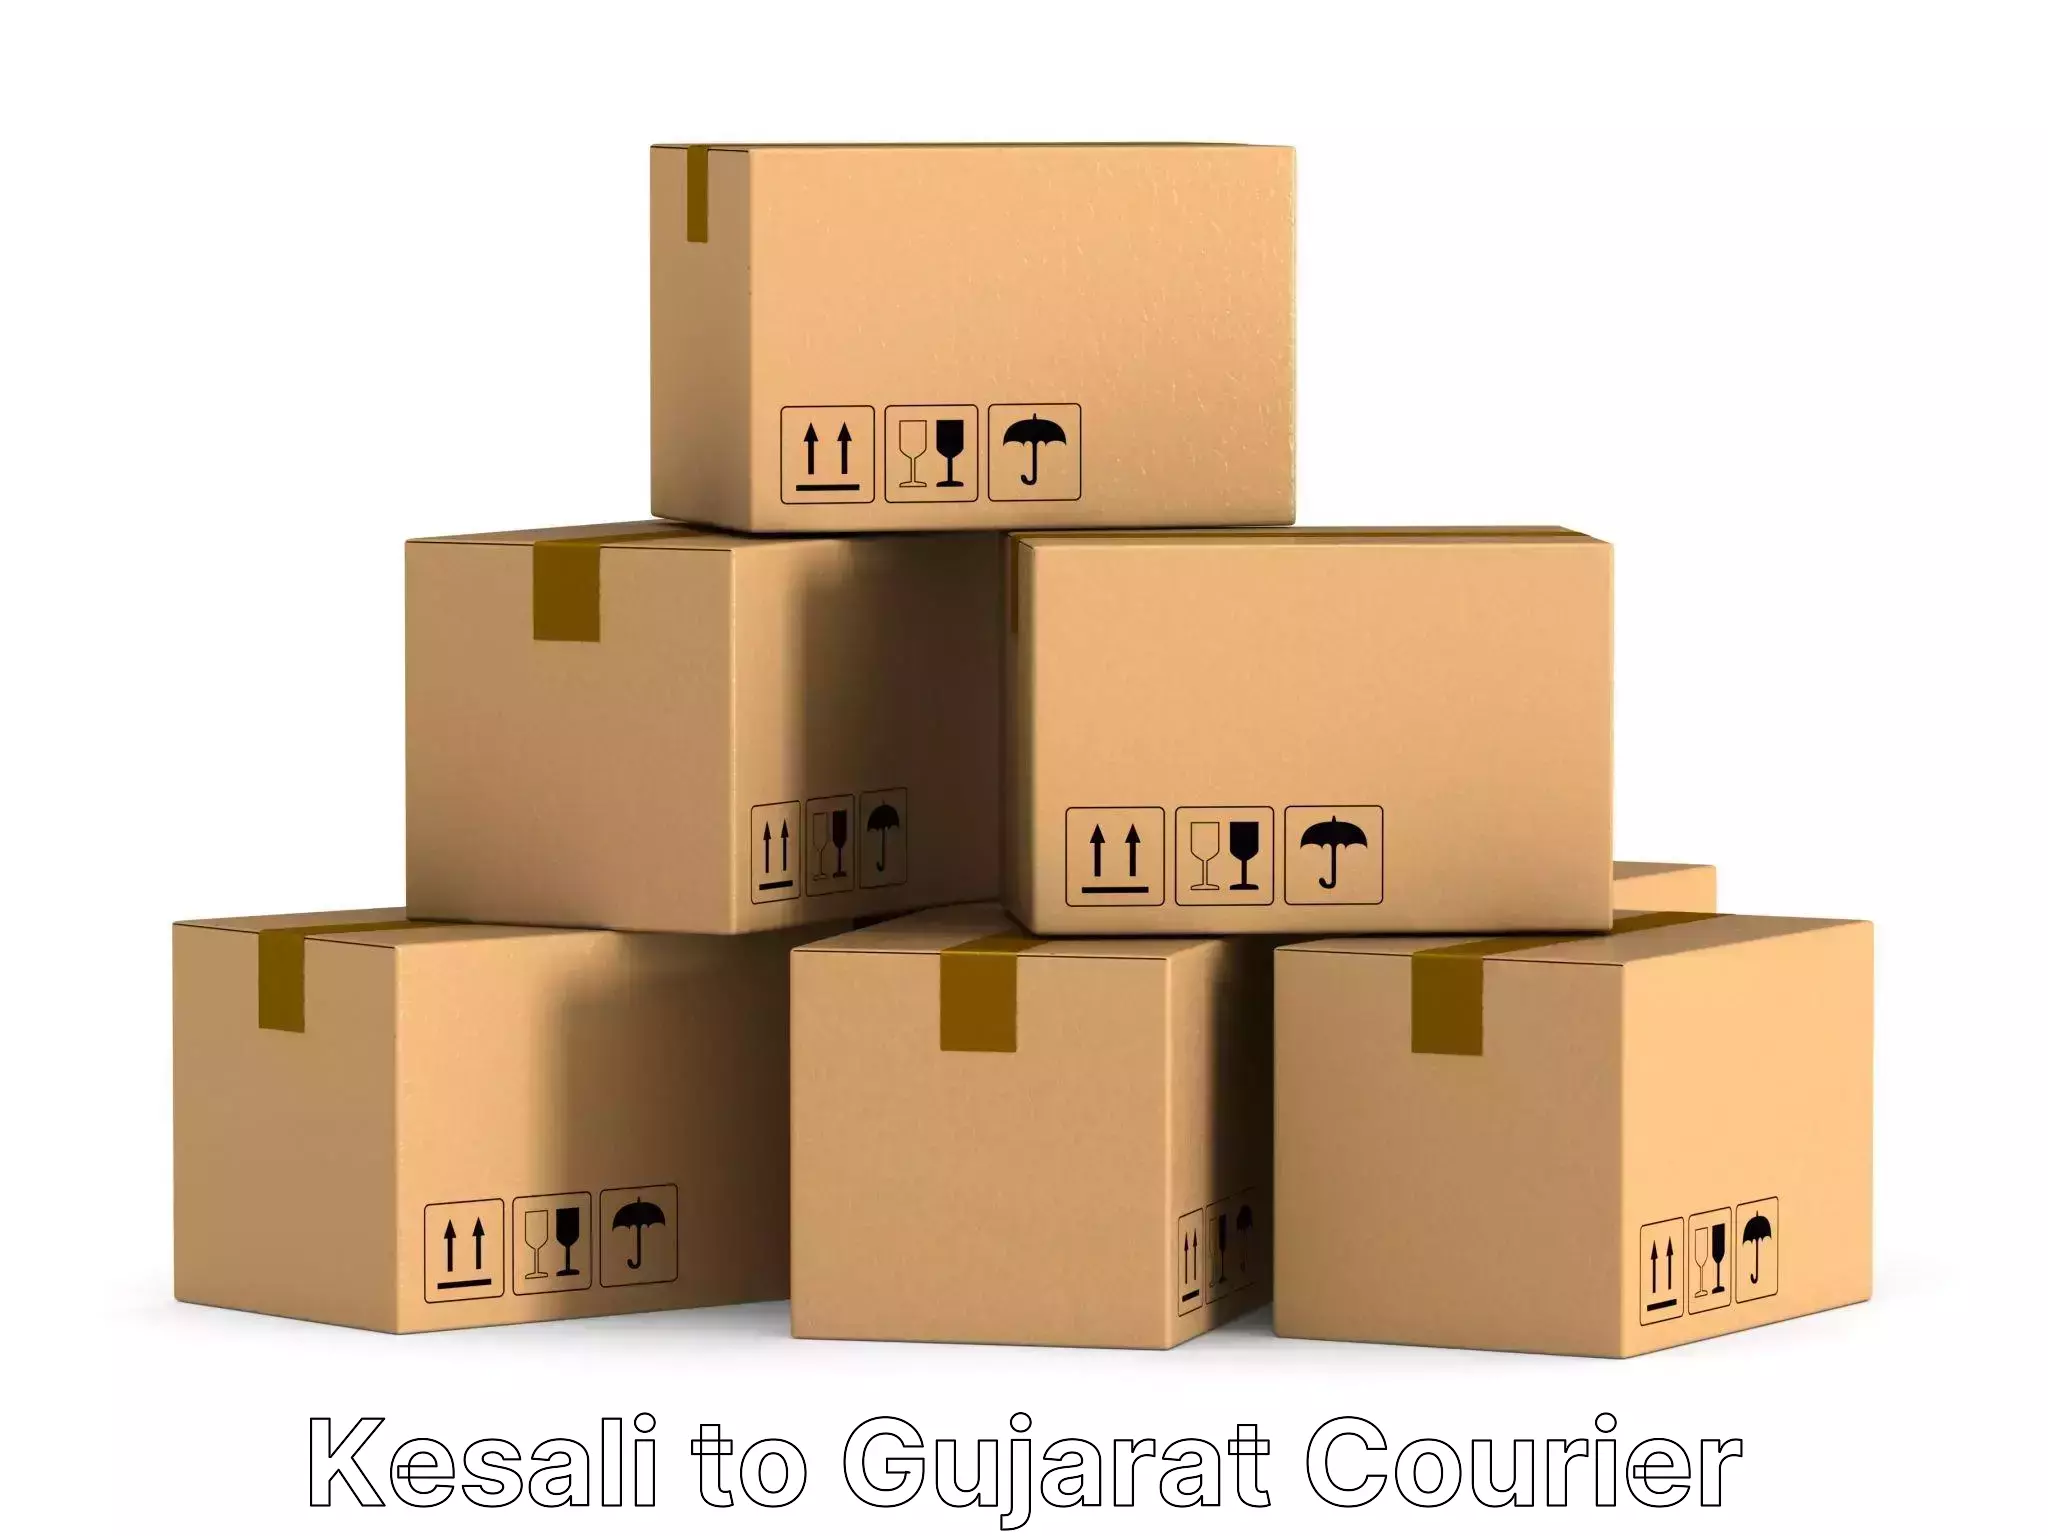 Hassle-free relocation Kesali to Ahmedabad